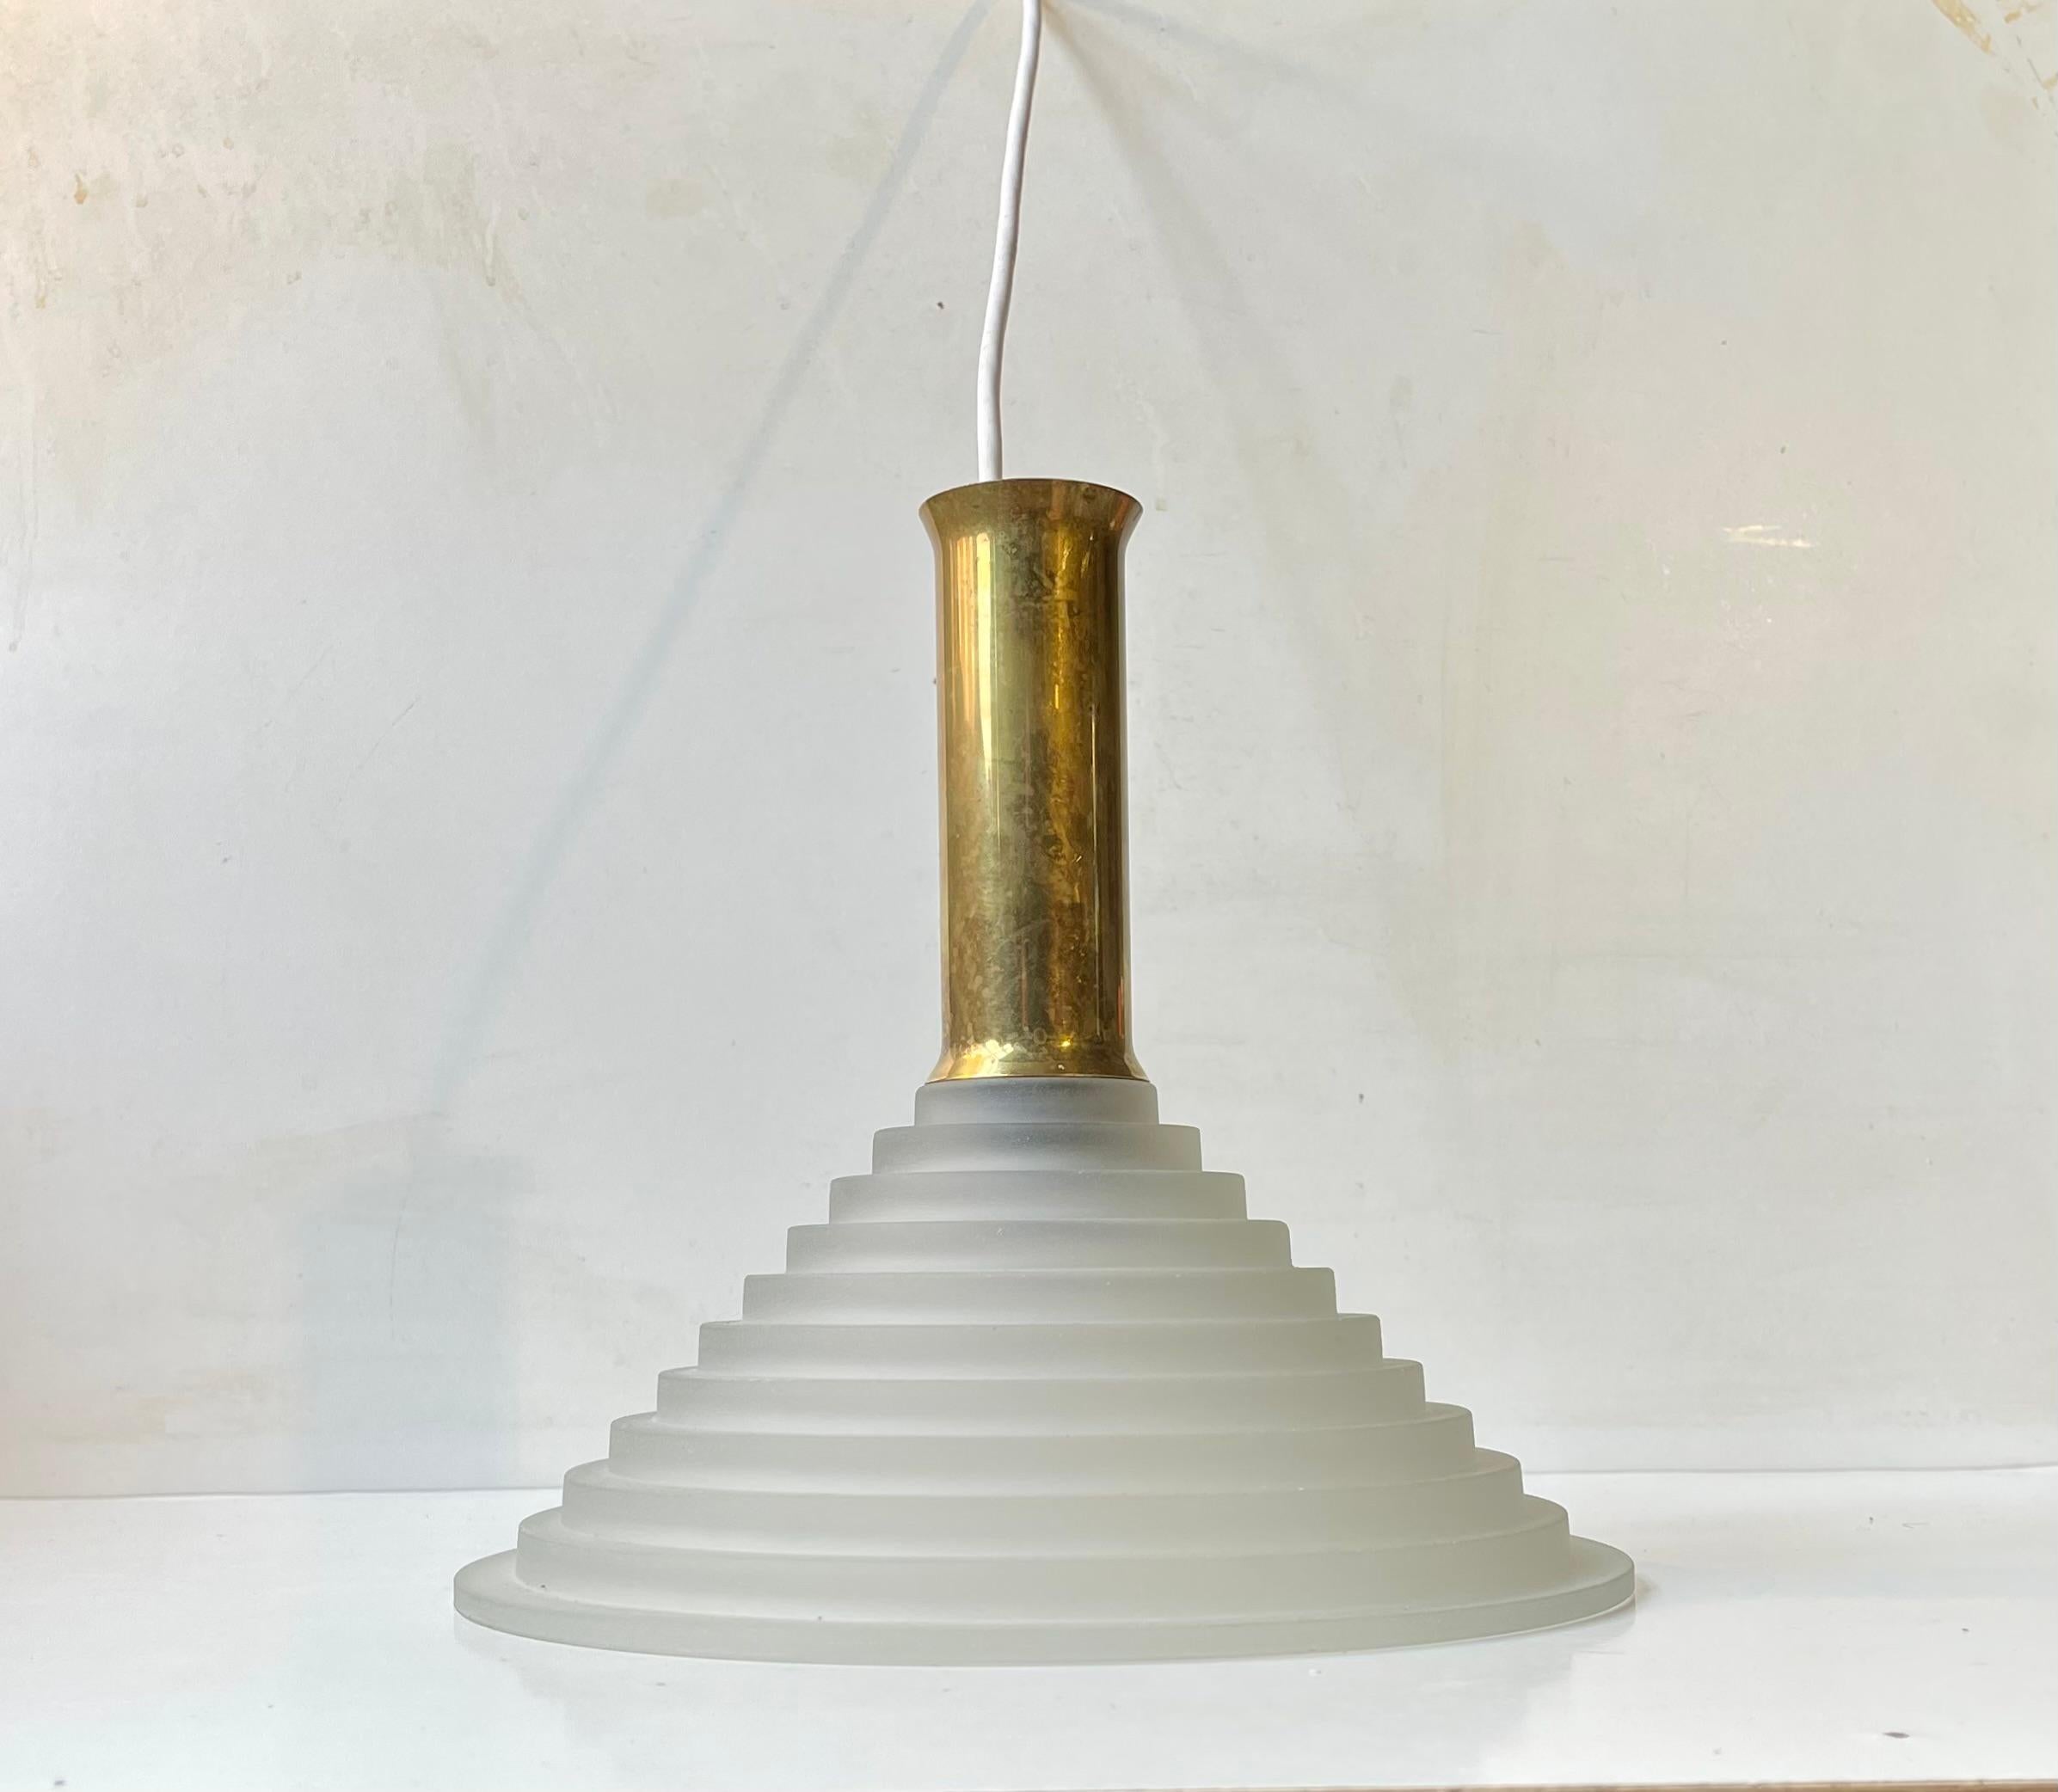 A stylish, unusual and possibly bespoke ceiling lamp composed of a frosted and architecturally 'staired' glass shade and featuring a top in solid patinated brass. Art Deco revival in style. Unknown Italian maker/design circa 1970-80. Measurements: